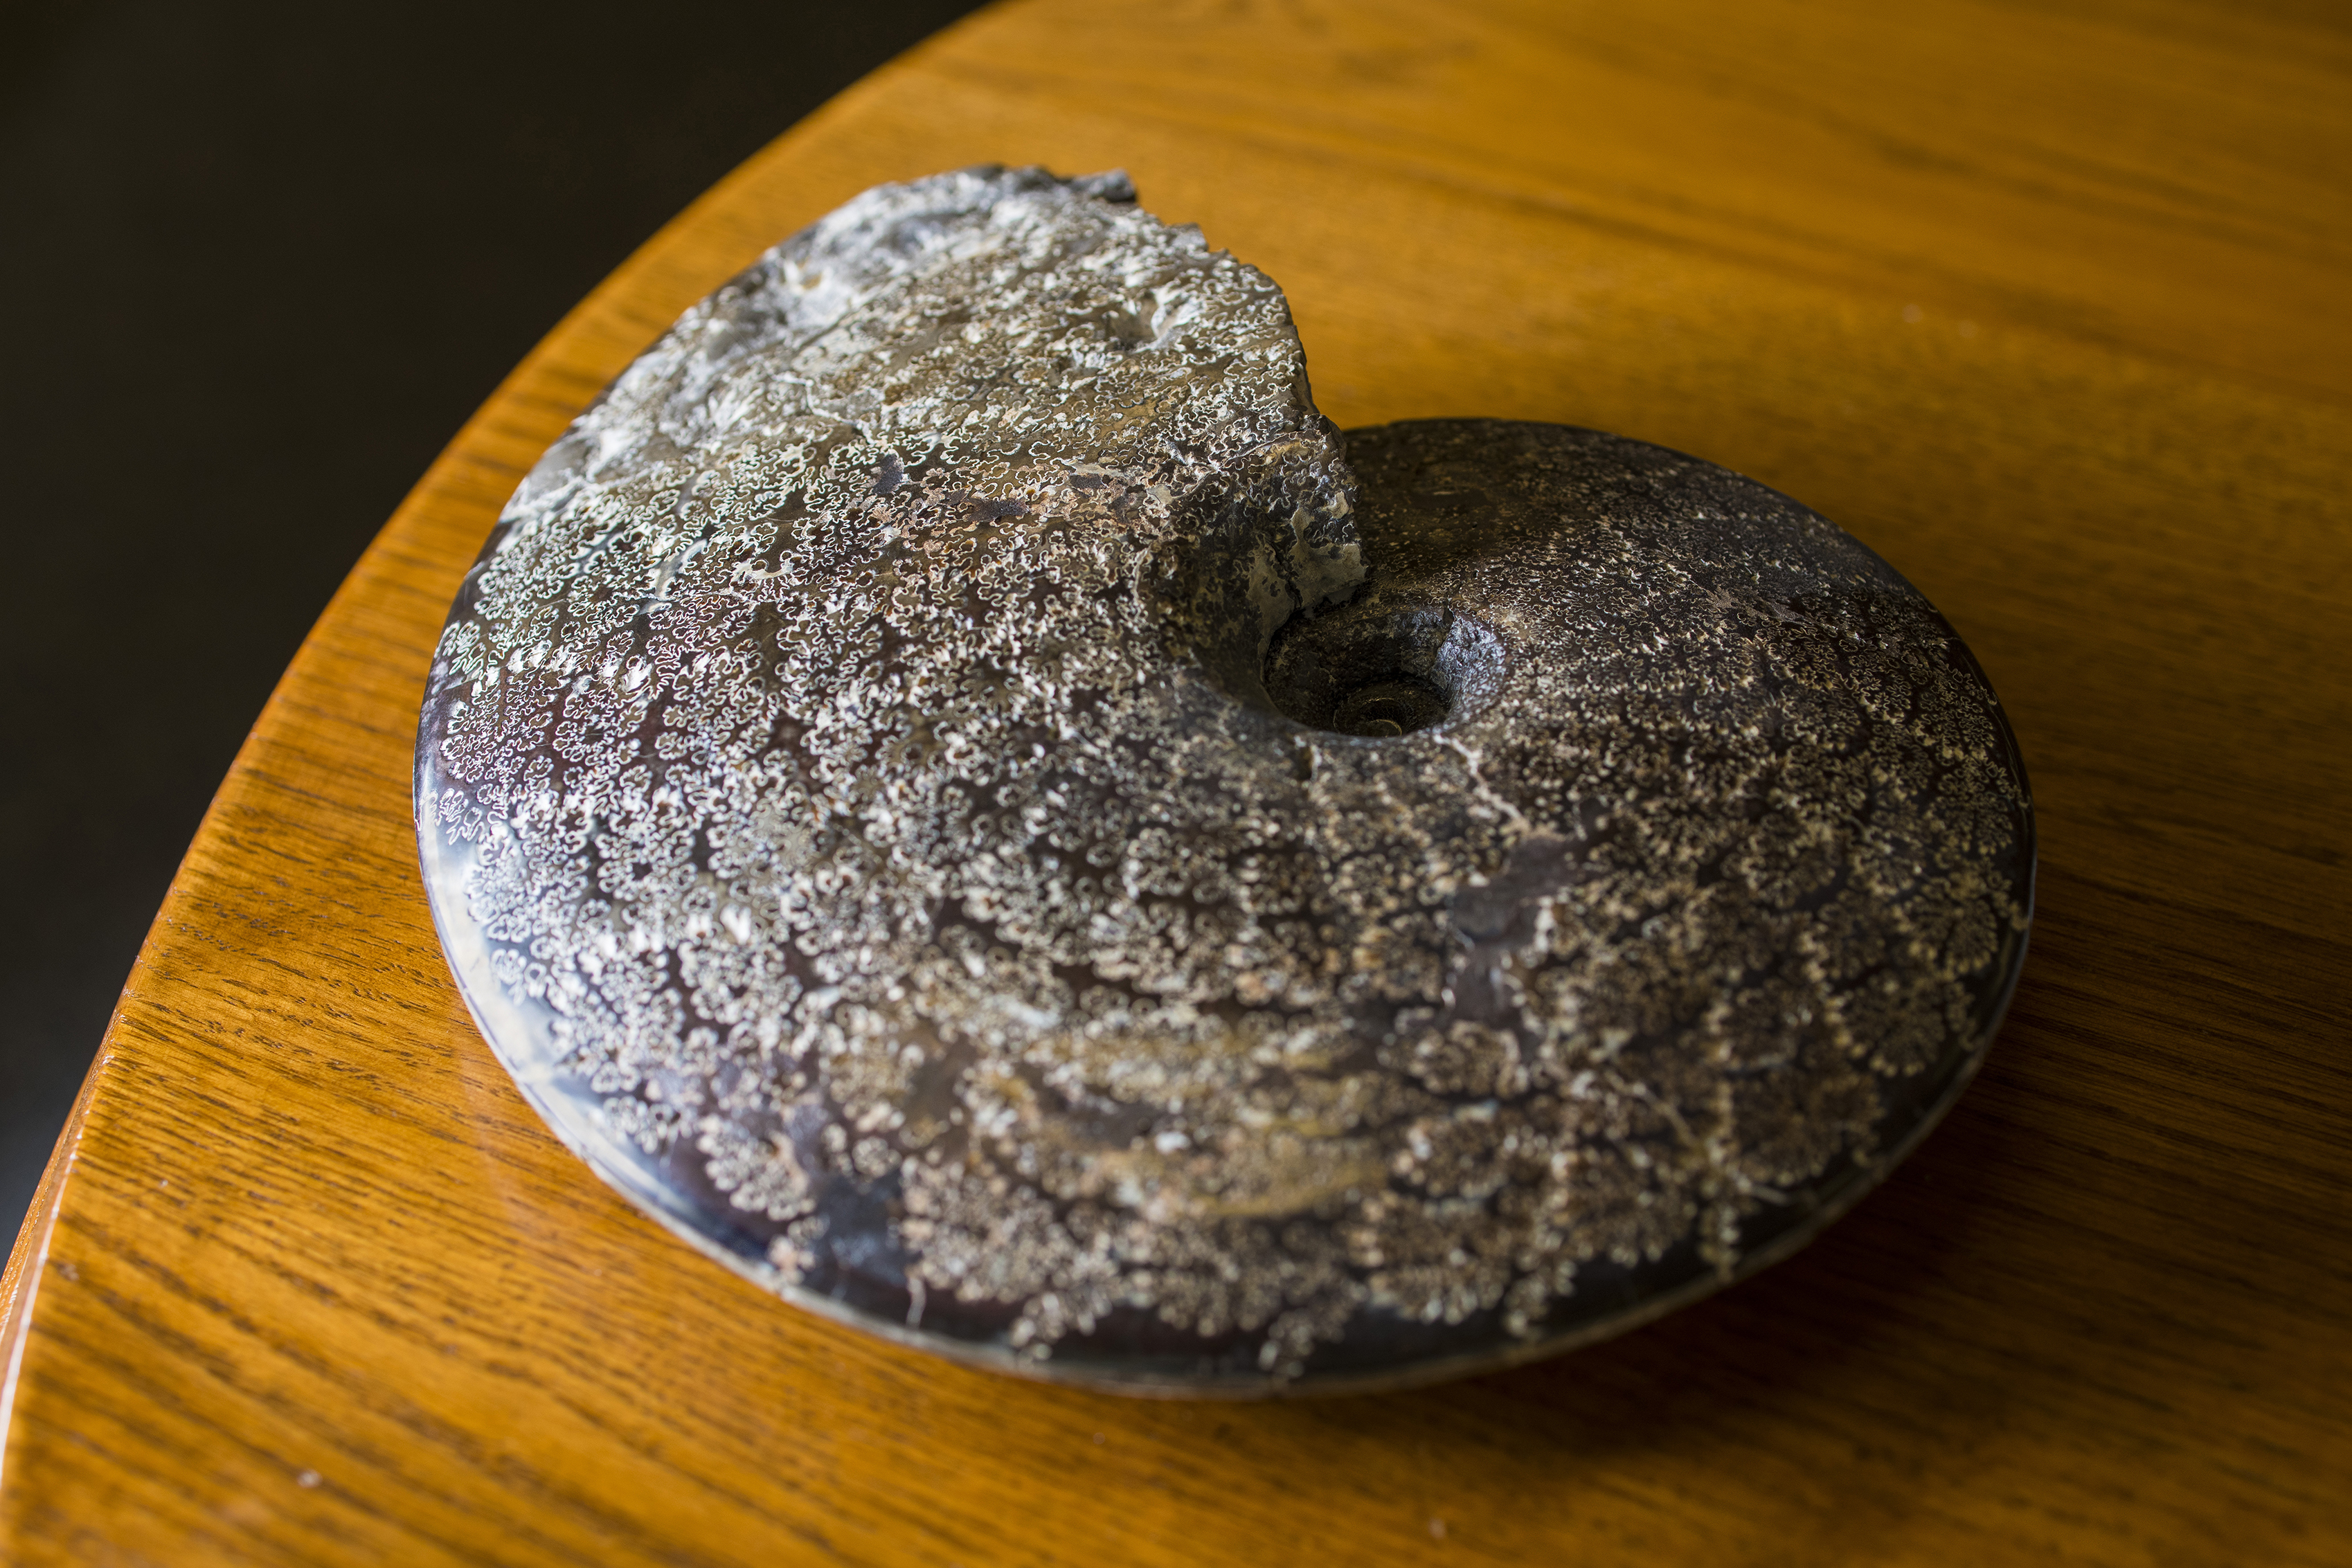 Rounded circular fossil with a hollow centre, two overlapping edges, and a white tinged textured surface.